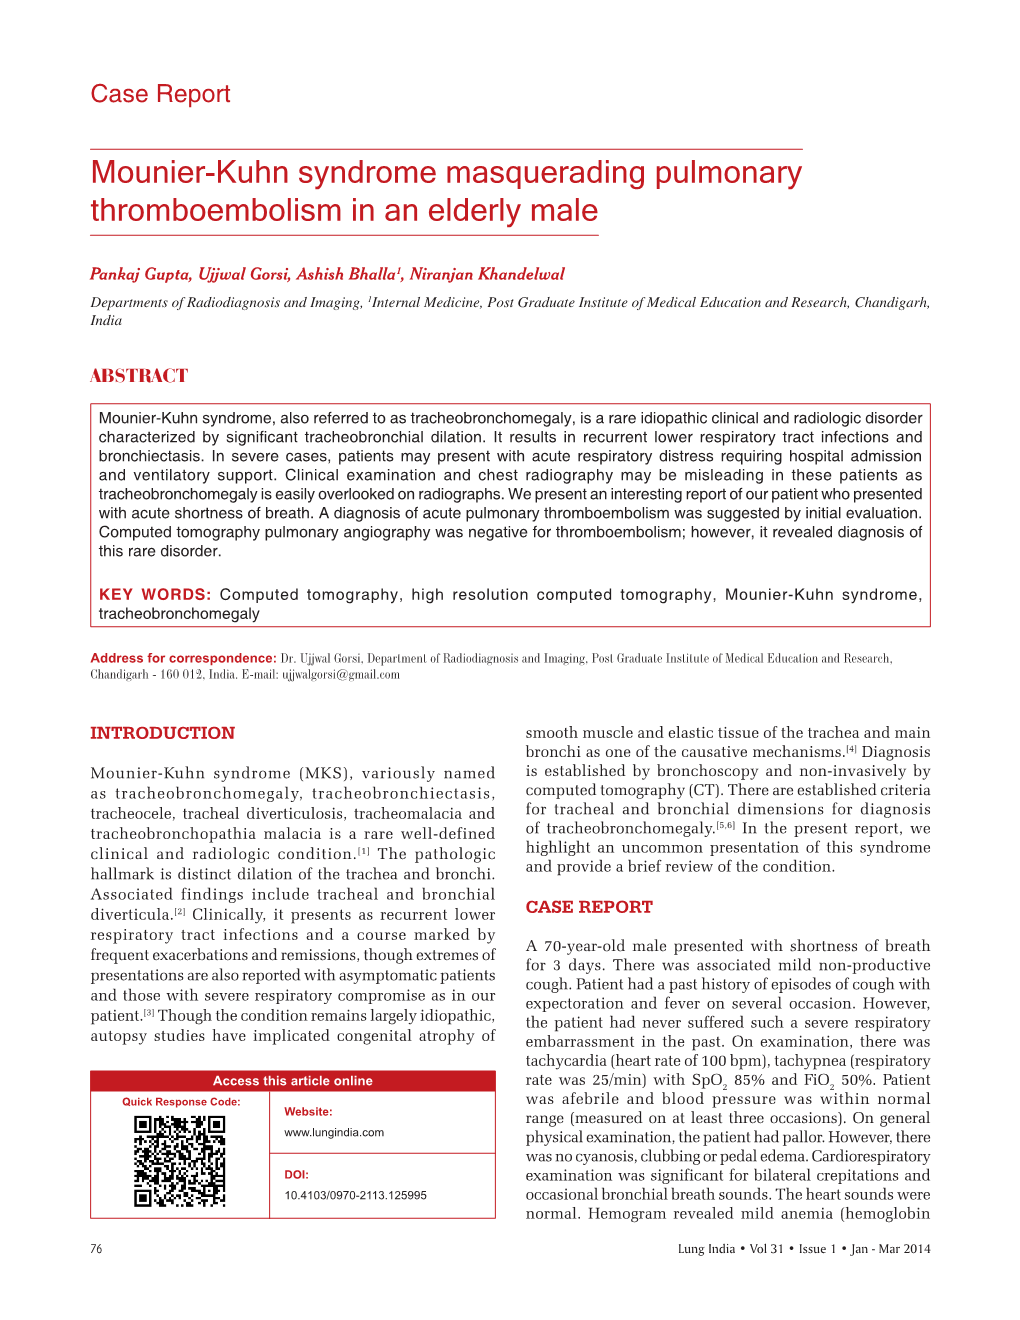 Mounier‑Kuhn Syndrome Masquerading Pulmonary Thromboembolism in an Elderly Male